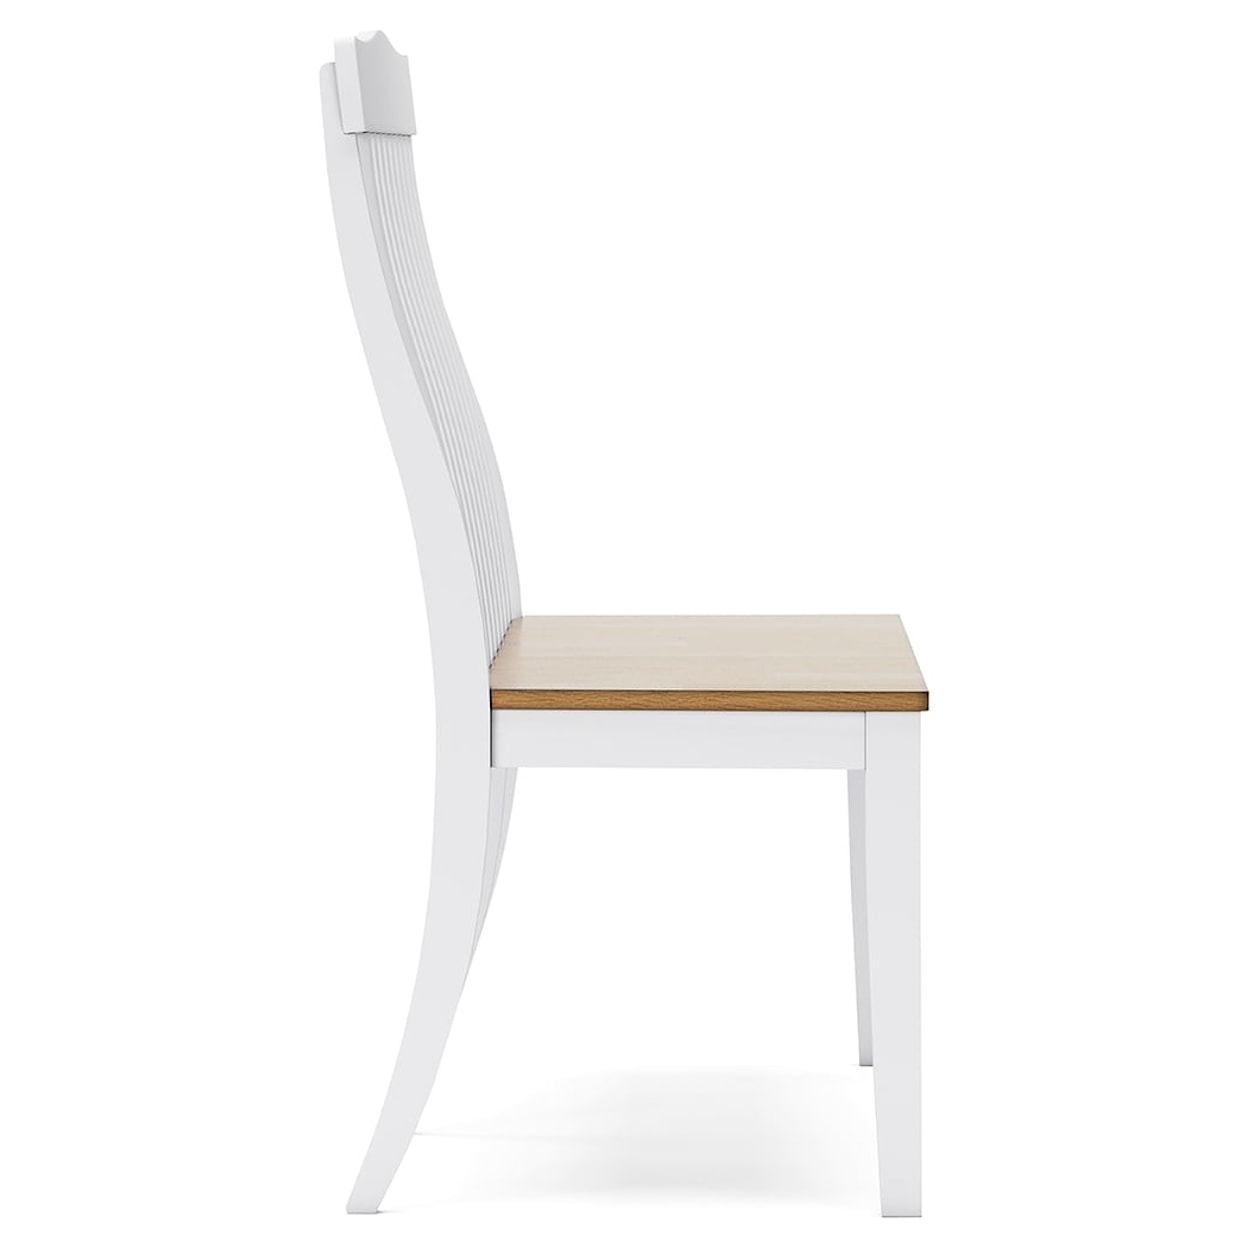 Signature Abigail Double Dining Chair